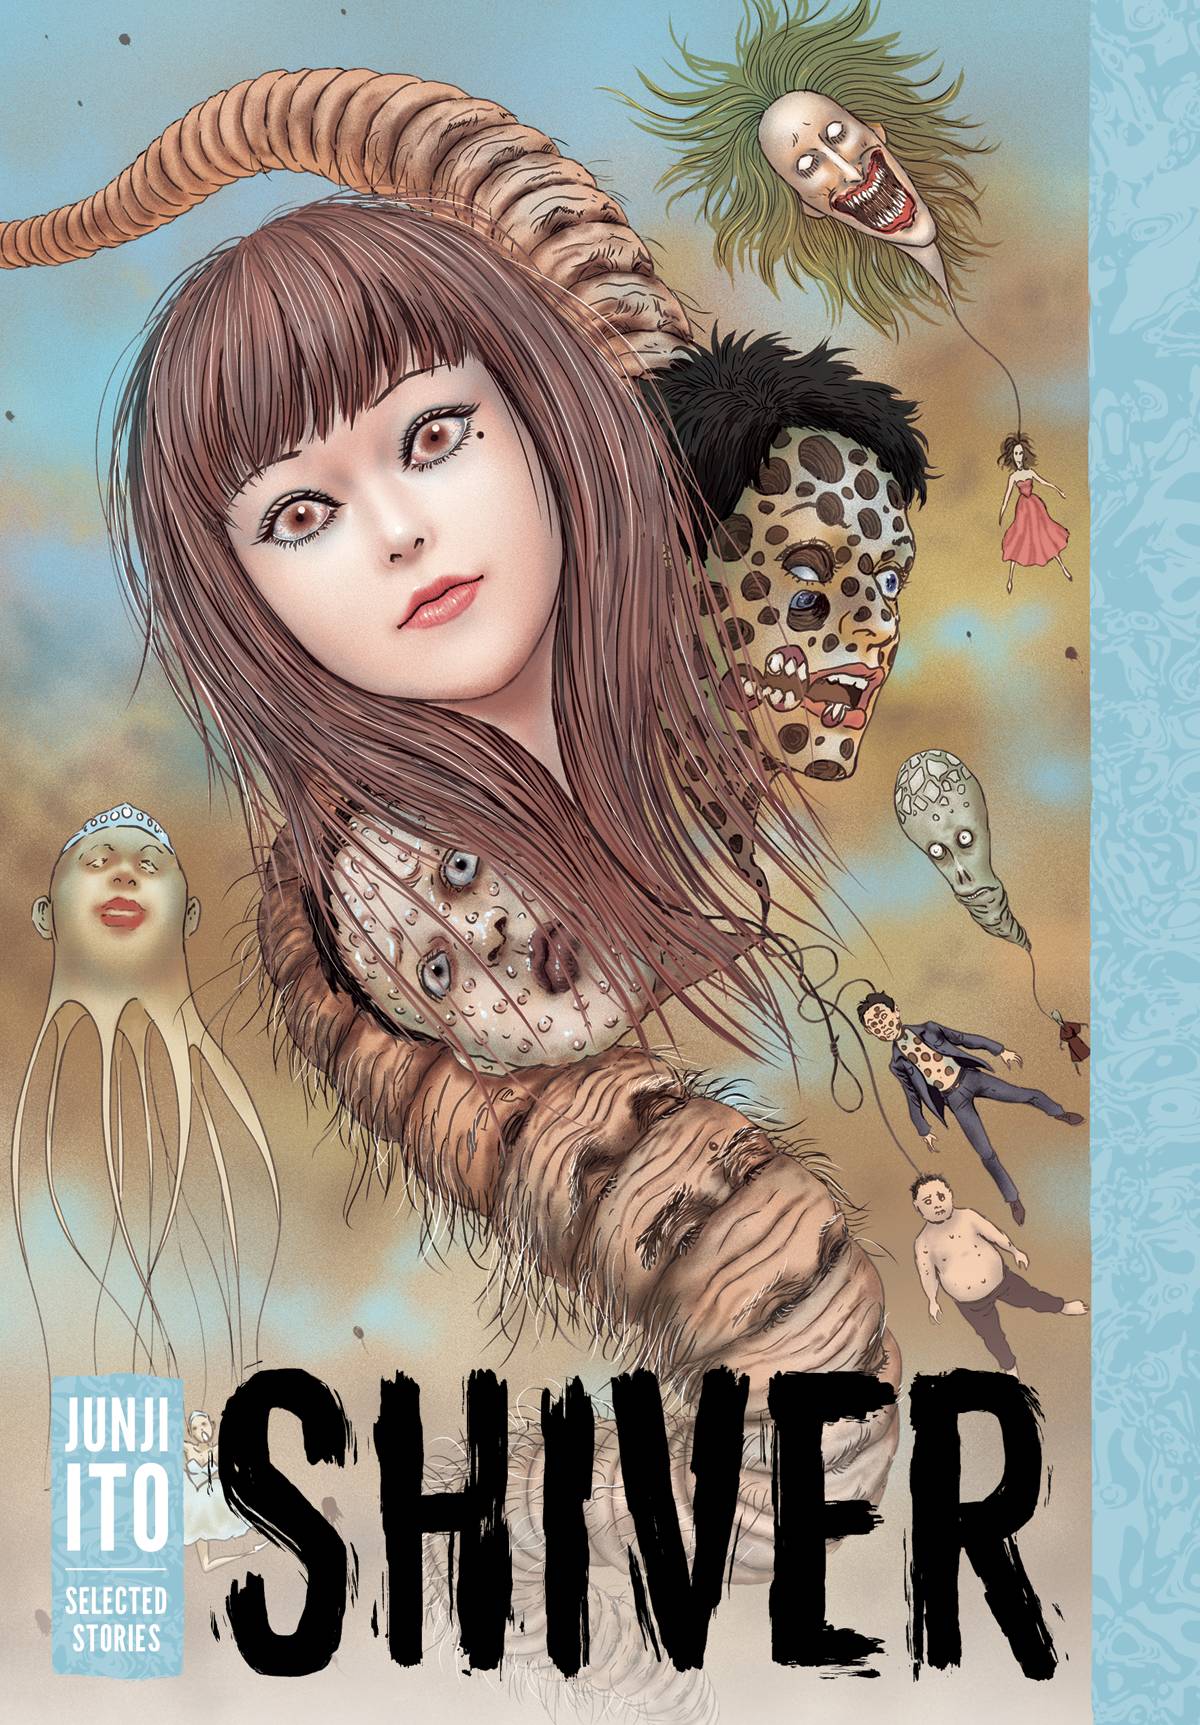 Junji Ito Story Collection Hardcover Volume 2 Shiver